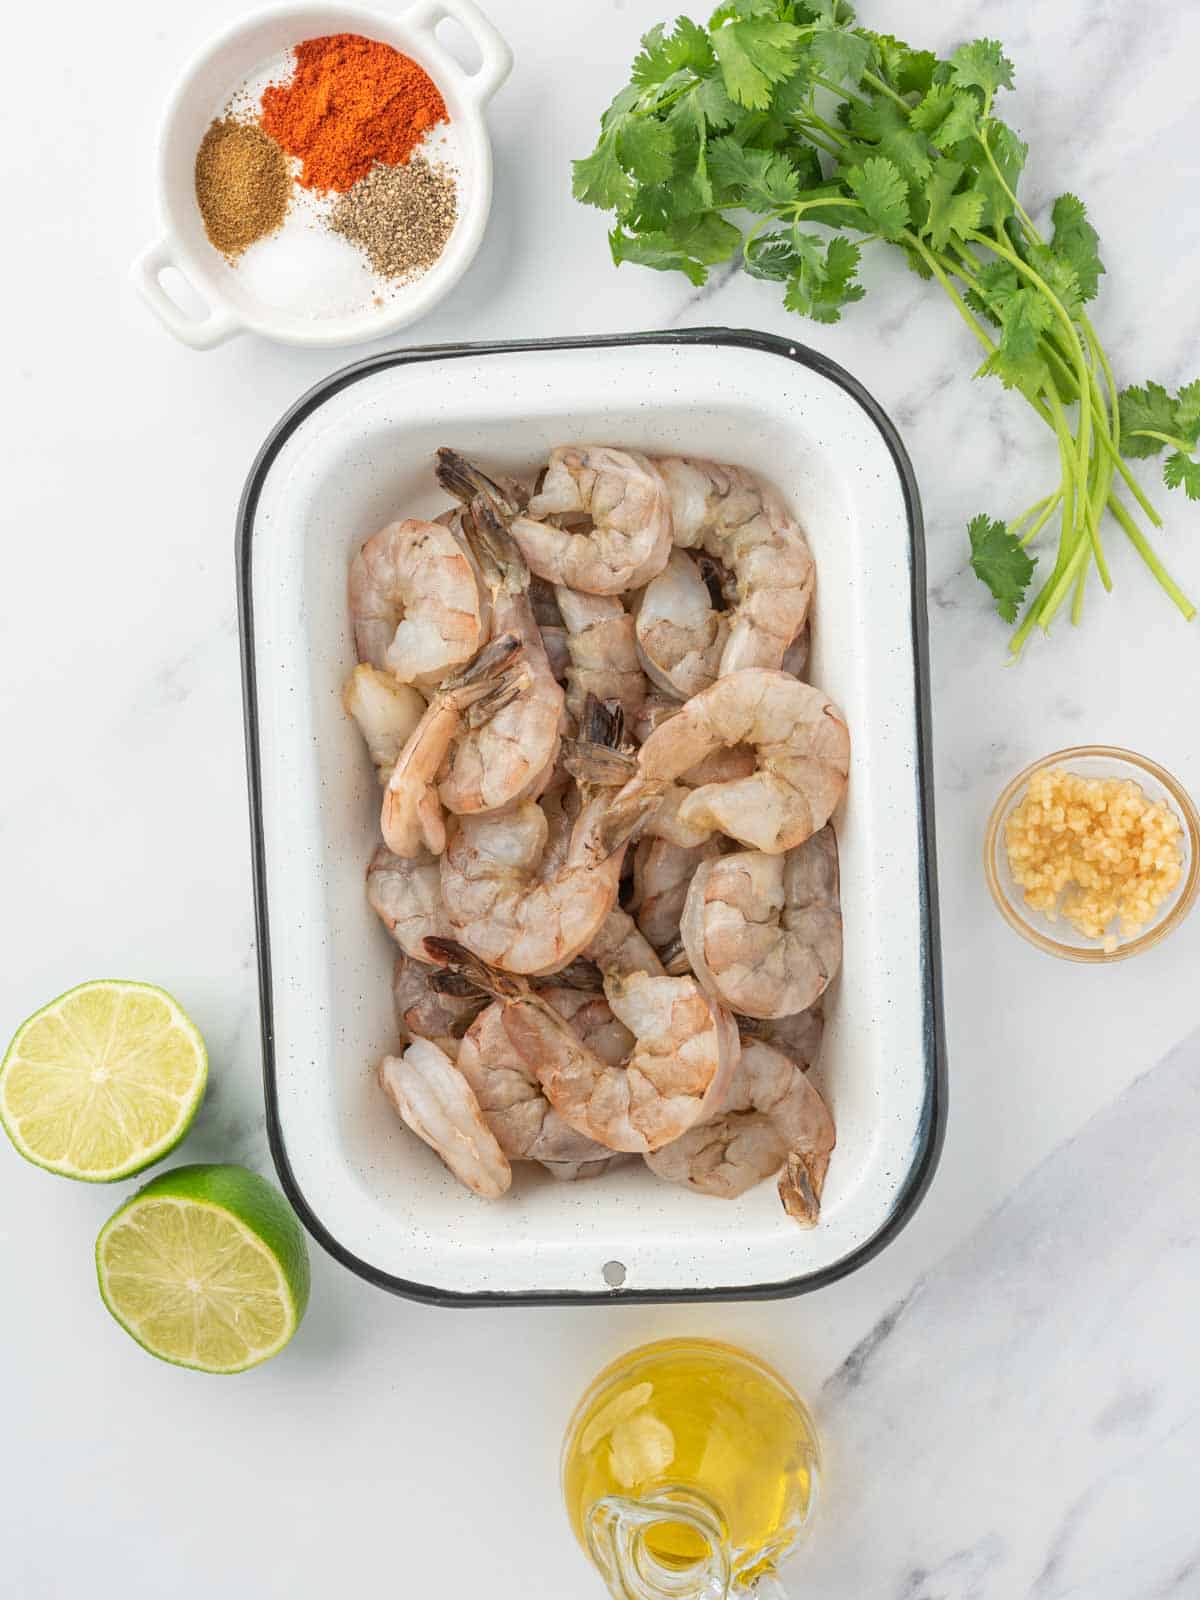 Ingredients needed for chili lime shrimp.